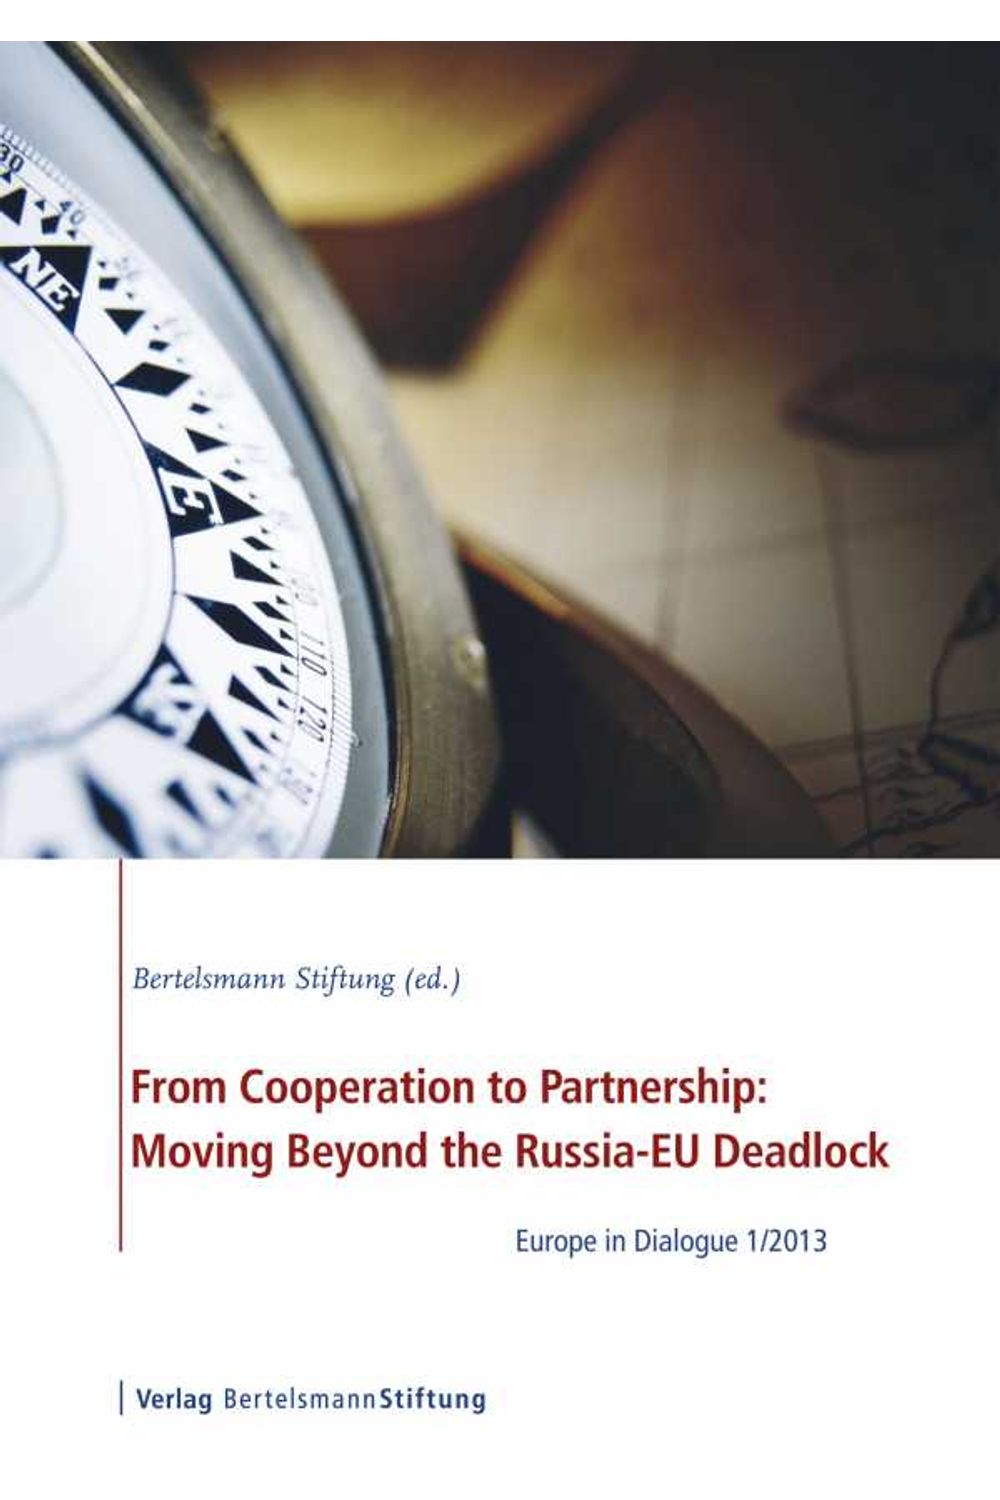 bw-from-cooperation-to-partnership-moving-beyond-the-russiaeu-deadlock-verlag-bertelsmann-stiftung-9783867935487